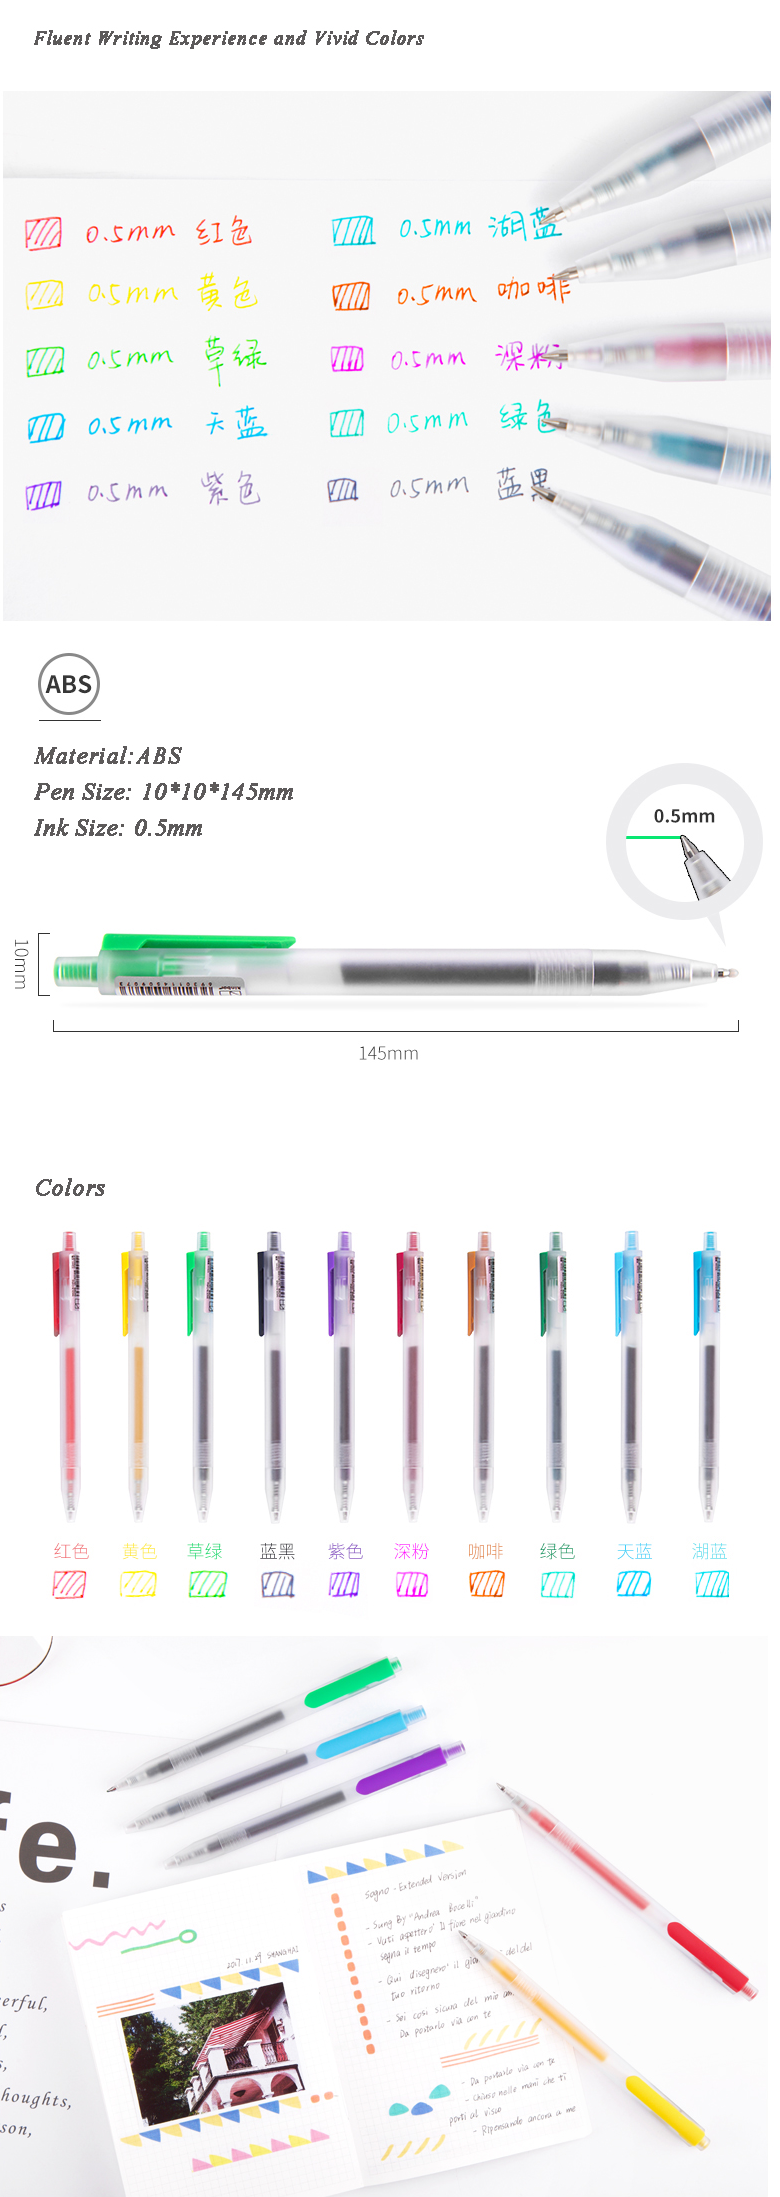 Kinbor-DTB6698-510-Colors-Colorful-Press-Gel-Pens-05mm-Frosted-Barrel-Drawing-Writing-Pen-Office-Sch-1538404-3